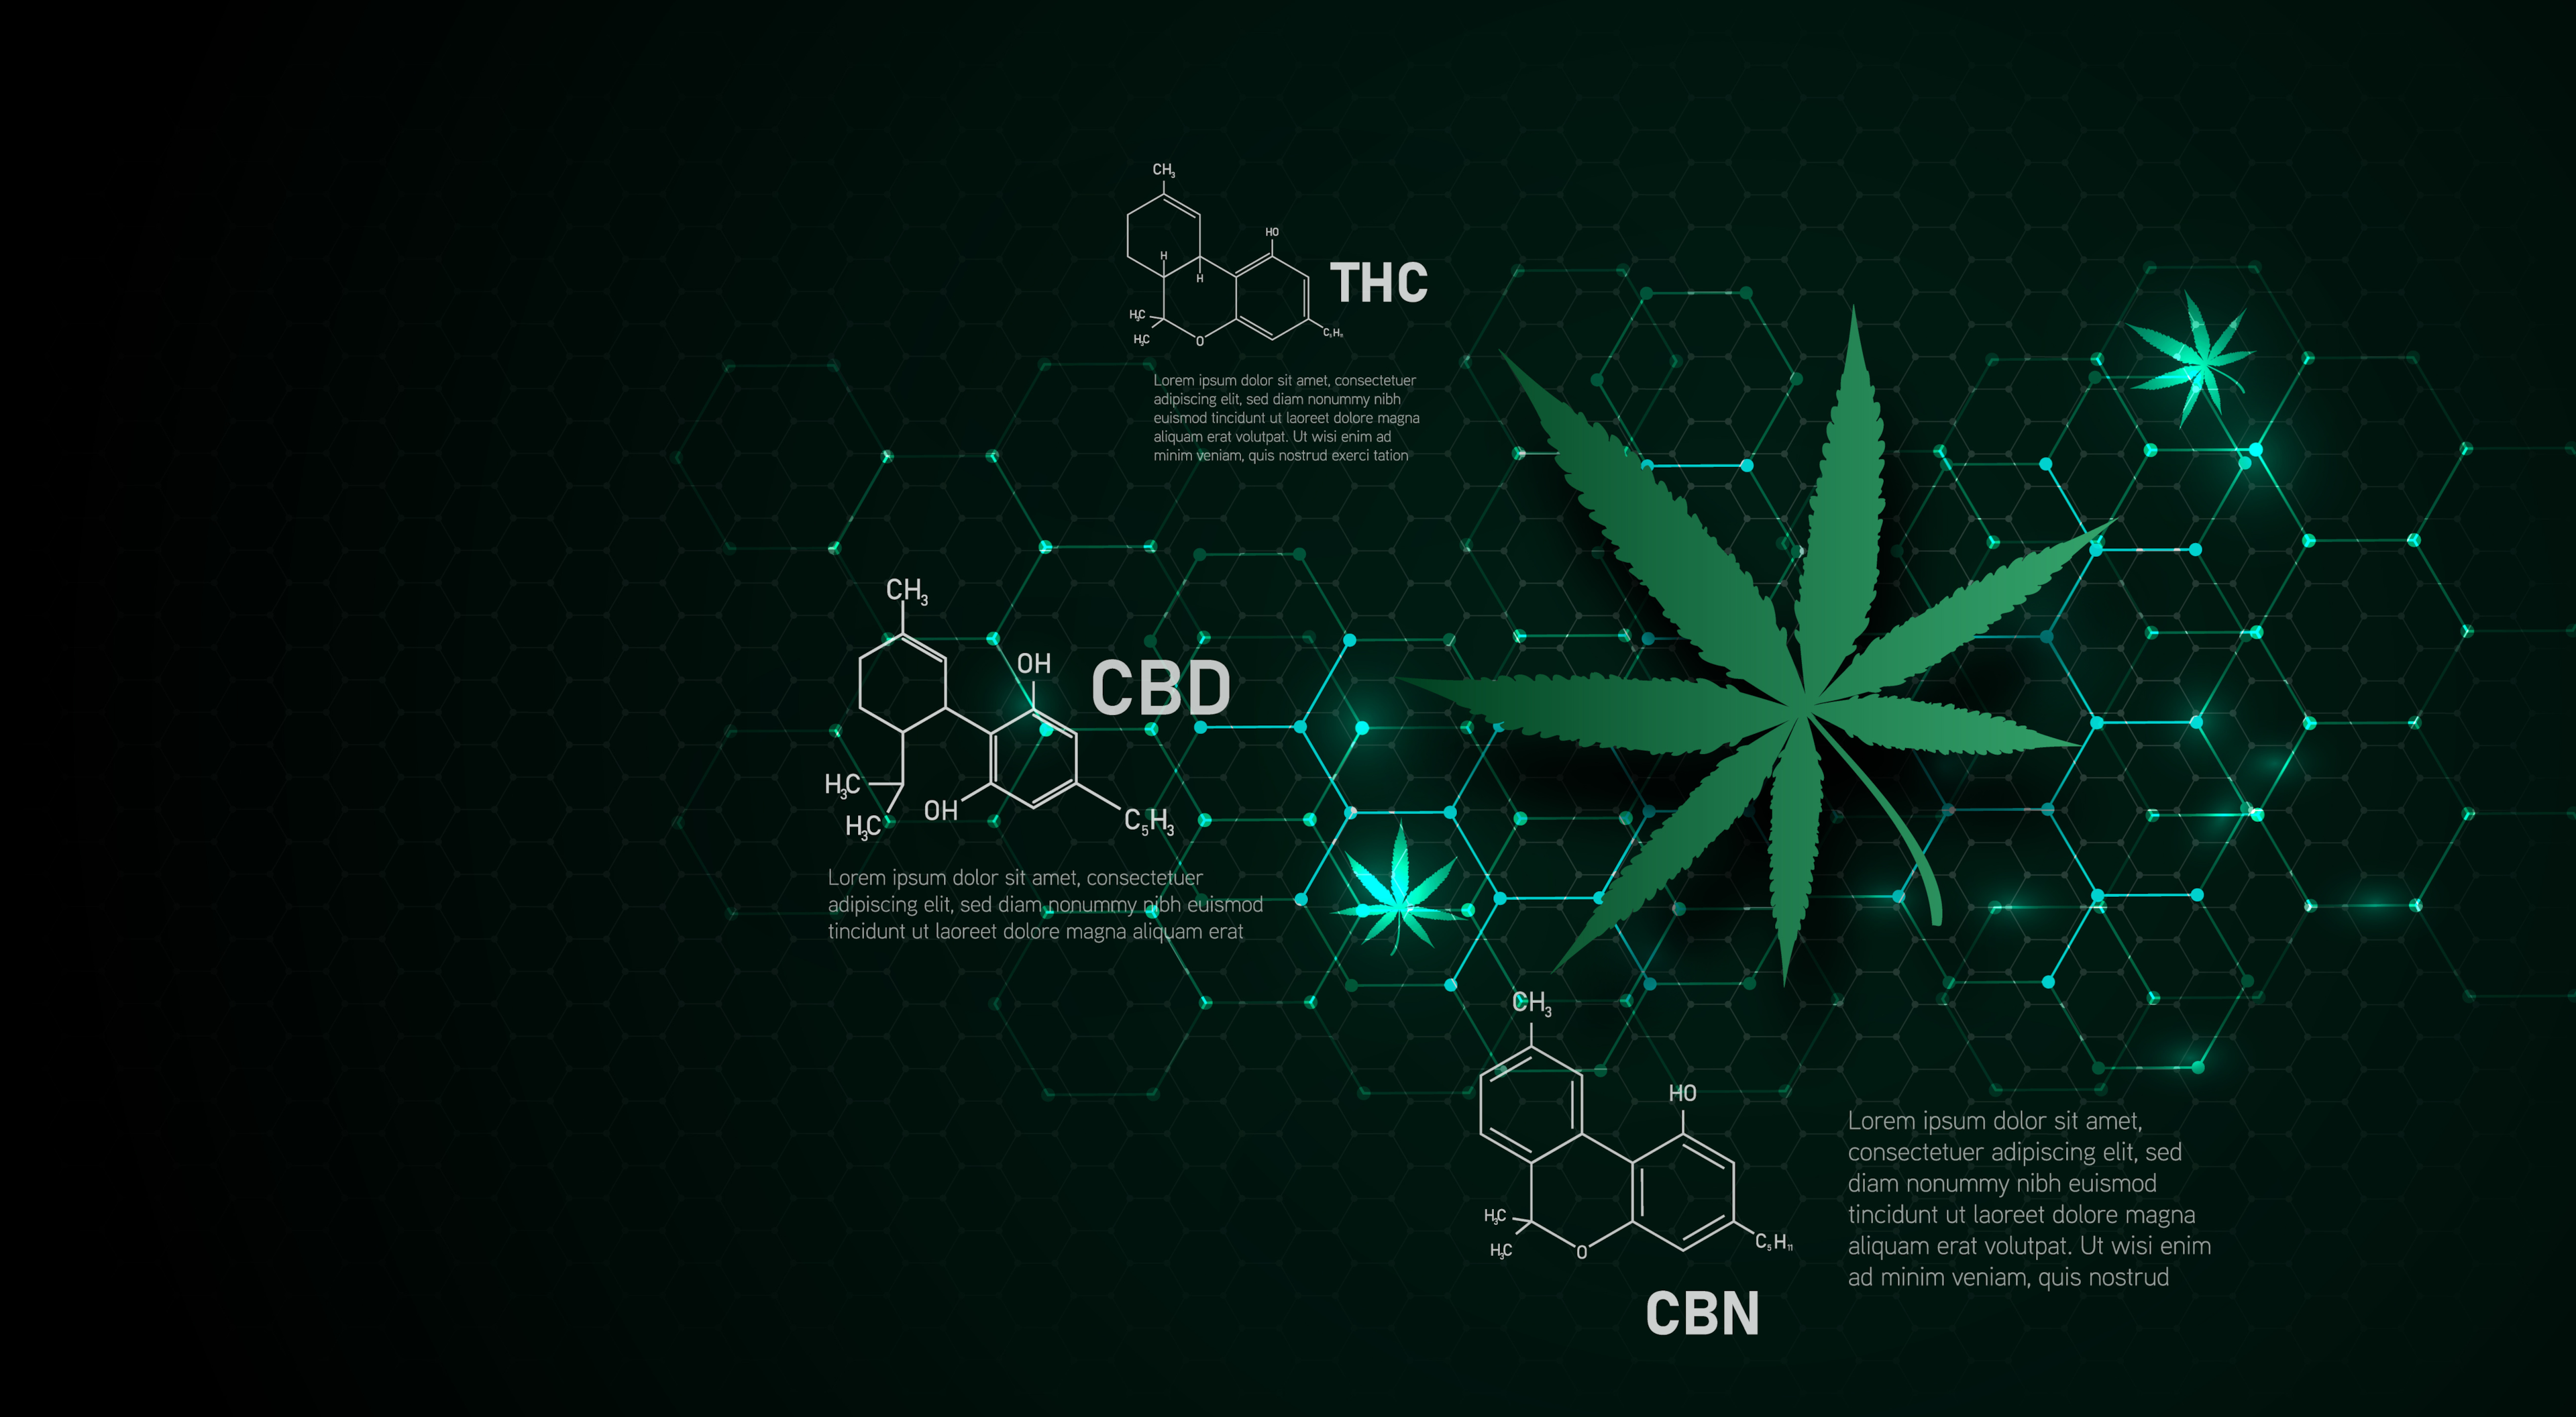 There are over 100 different cannabinoids in the cannabis plant, not just Delta 8 THC, Delta 9 THC or CBD.